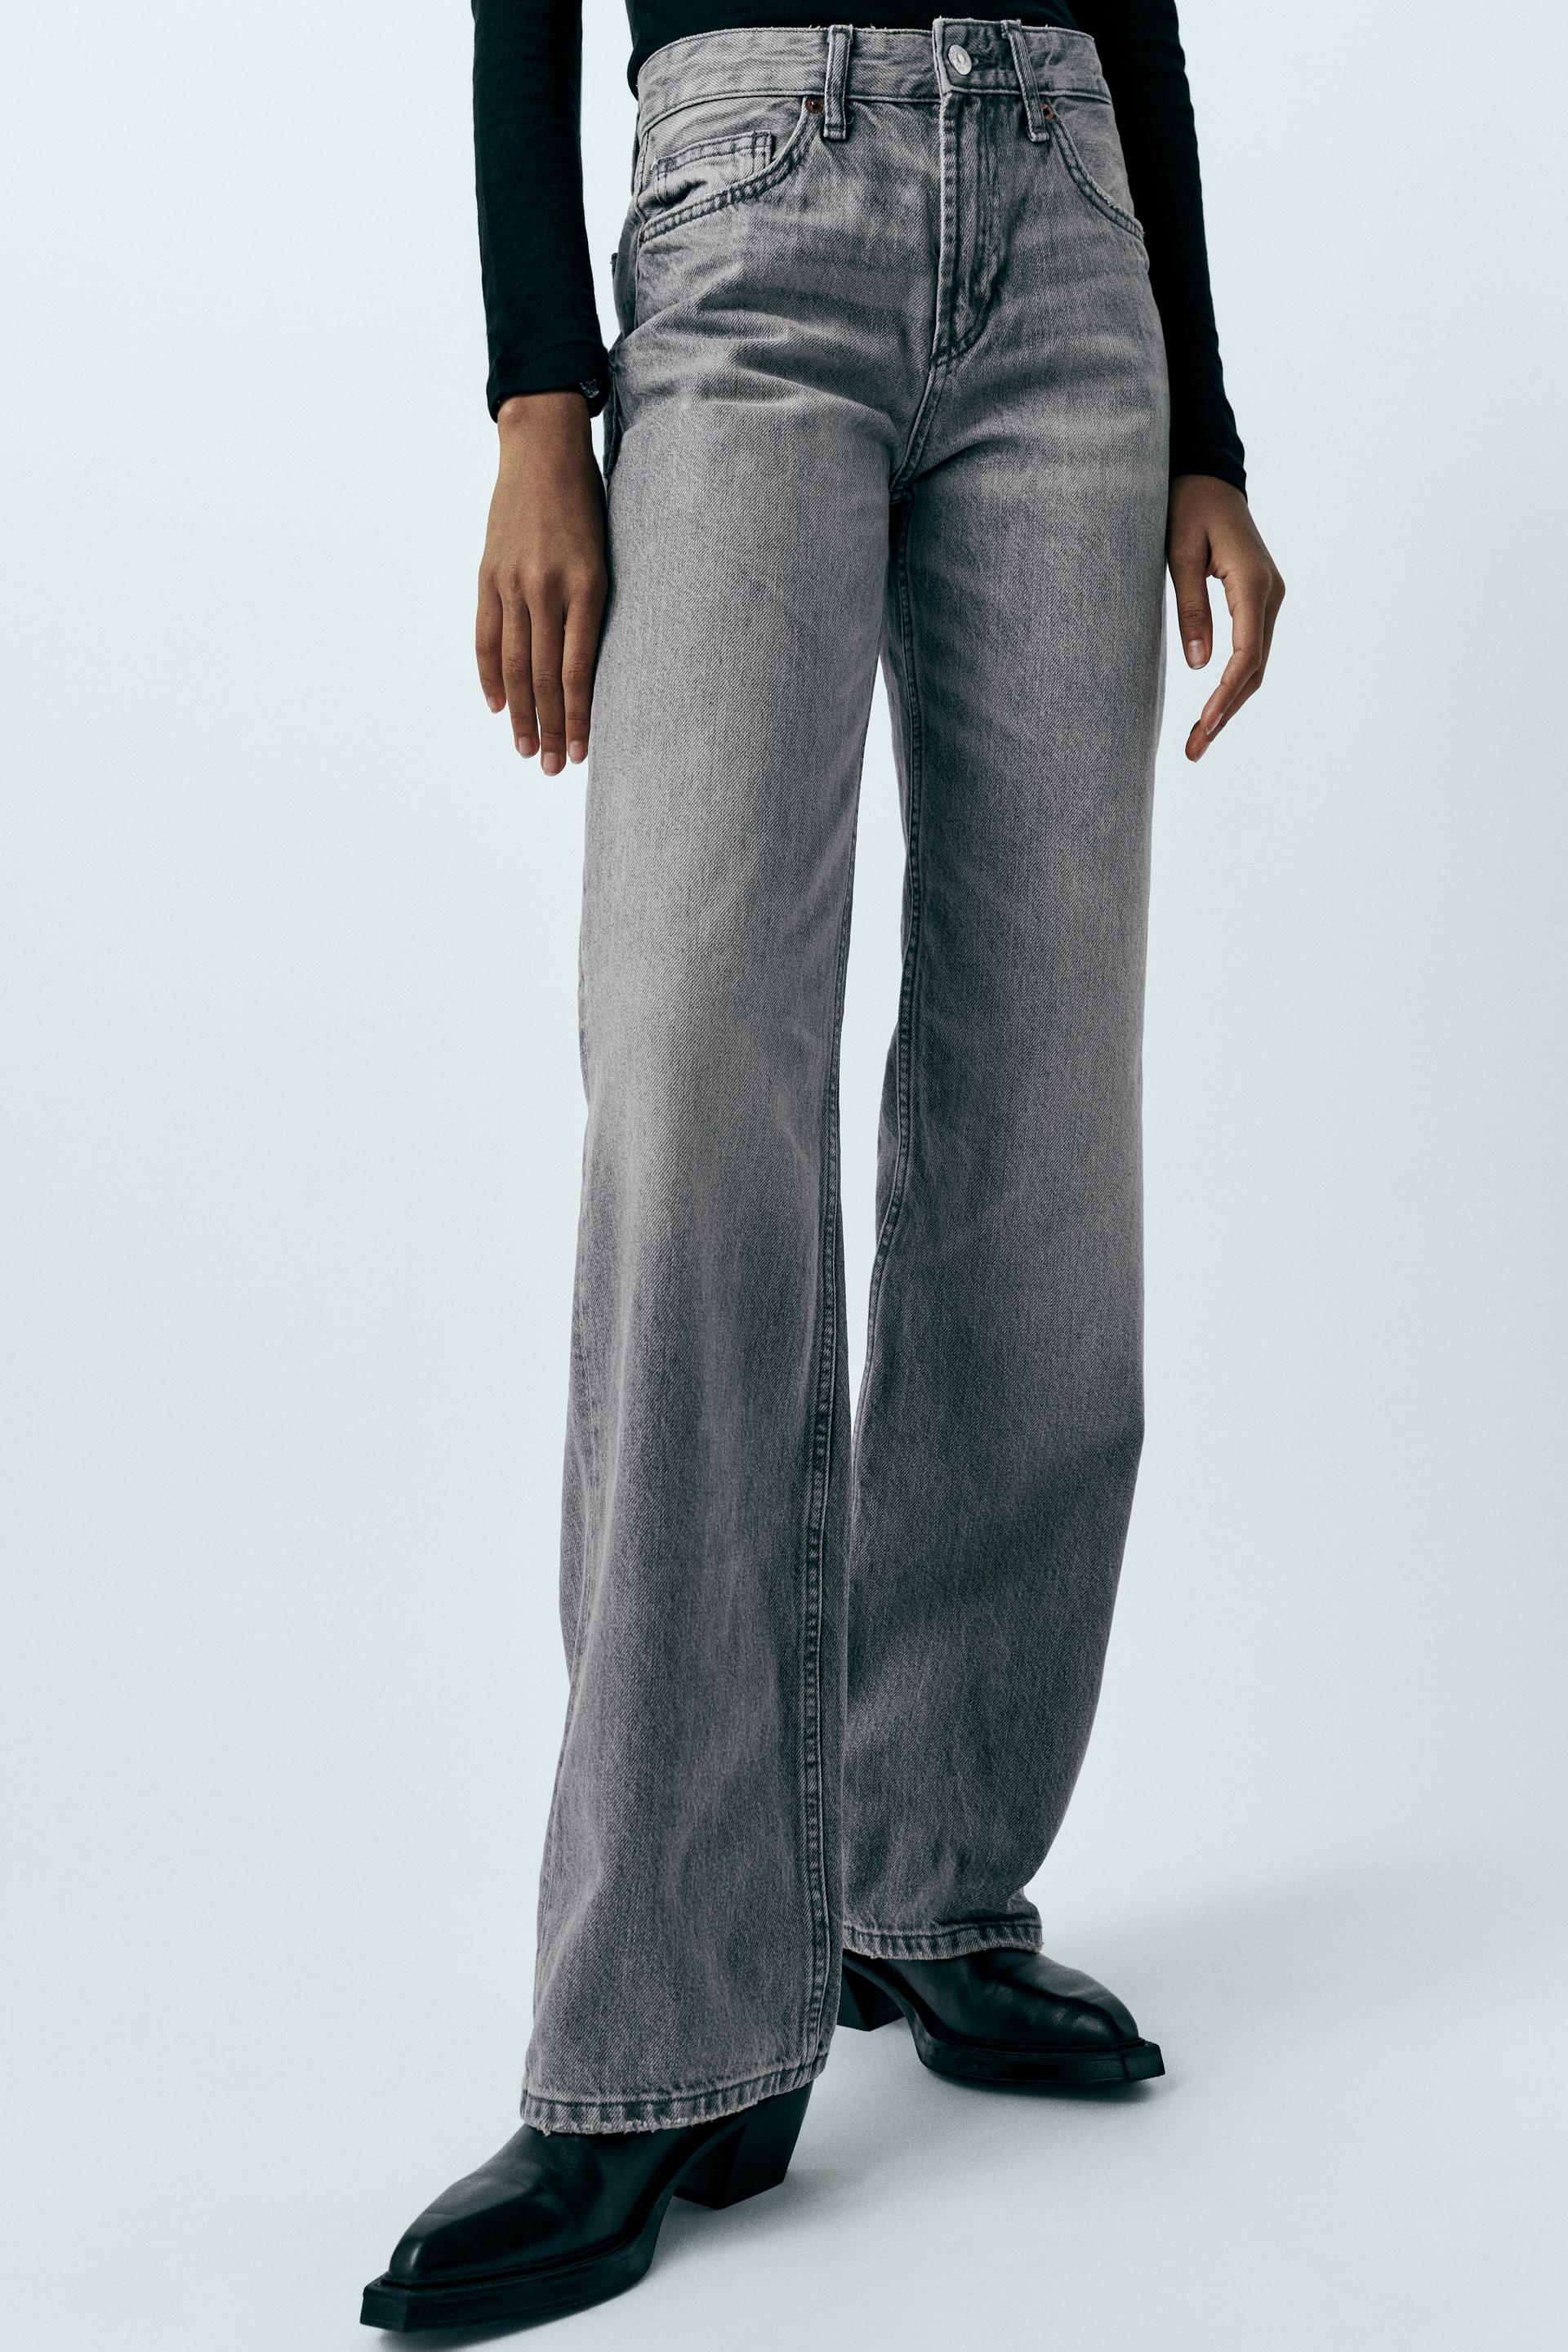 Zara Mama's Jeans for Women in Lekki - Clothing, Dales Store Ng